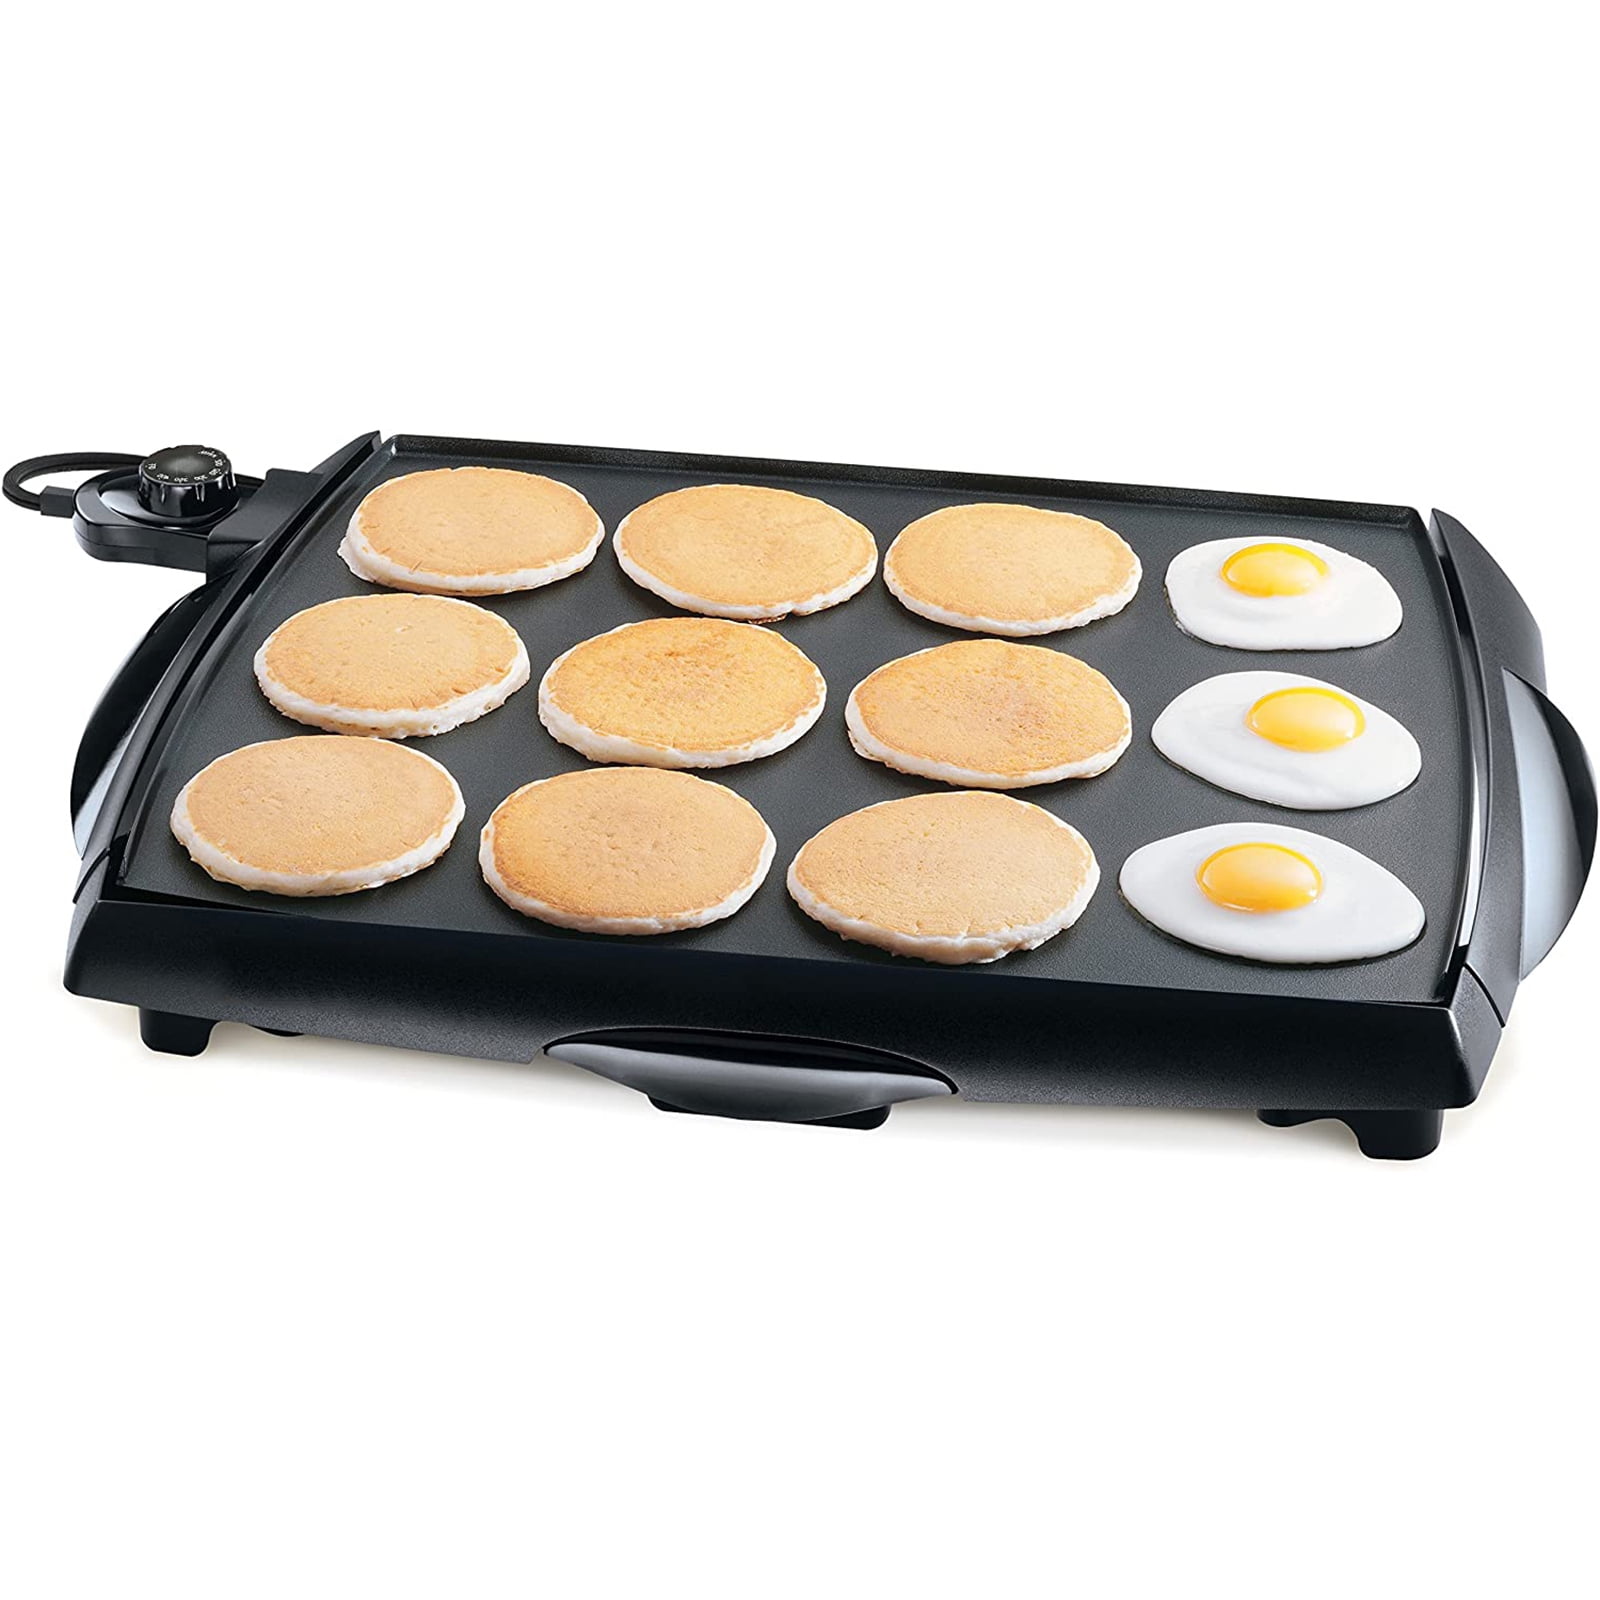 Extra Large Nonstick Electric Griddle - 16 Slices of French Toast at once